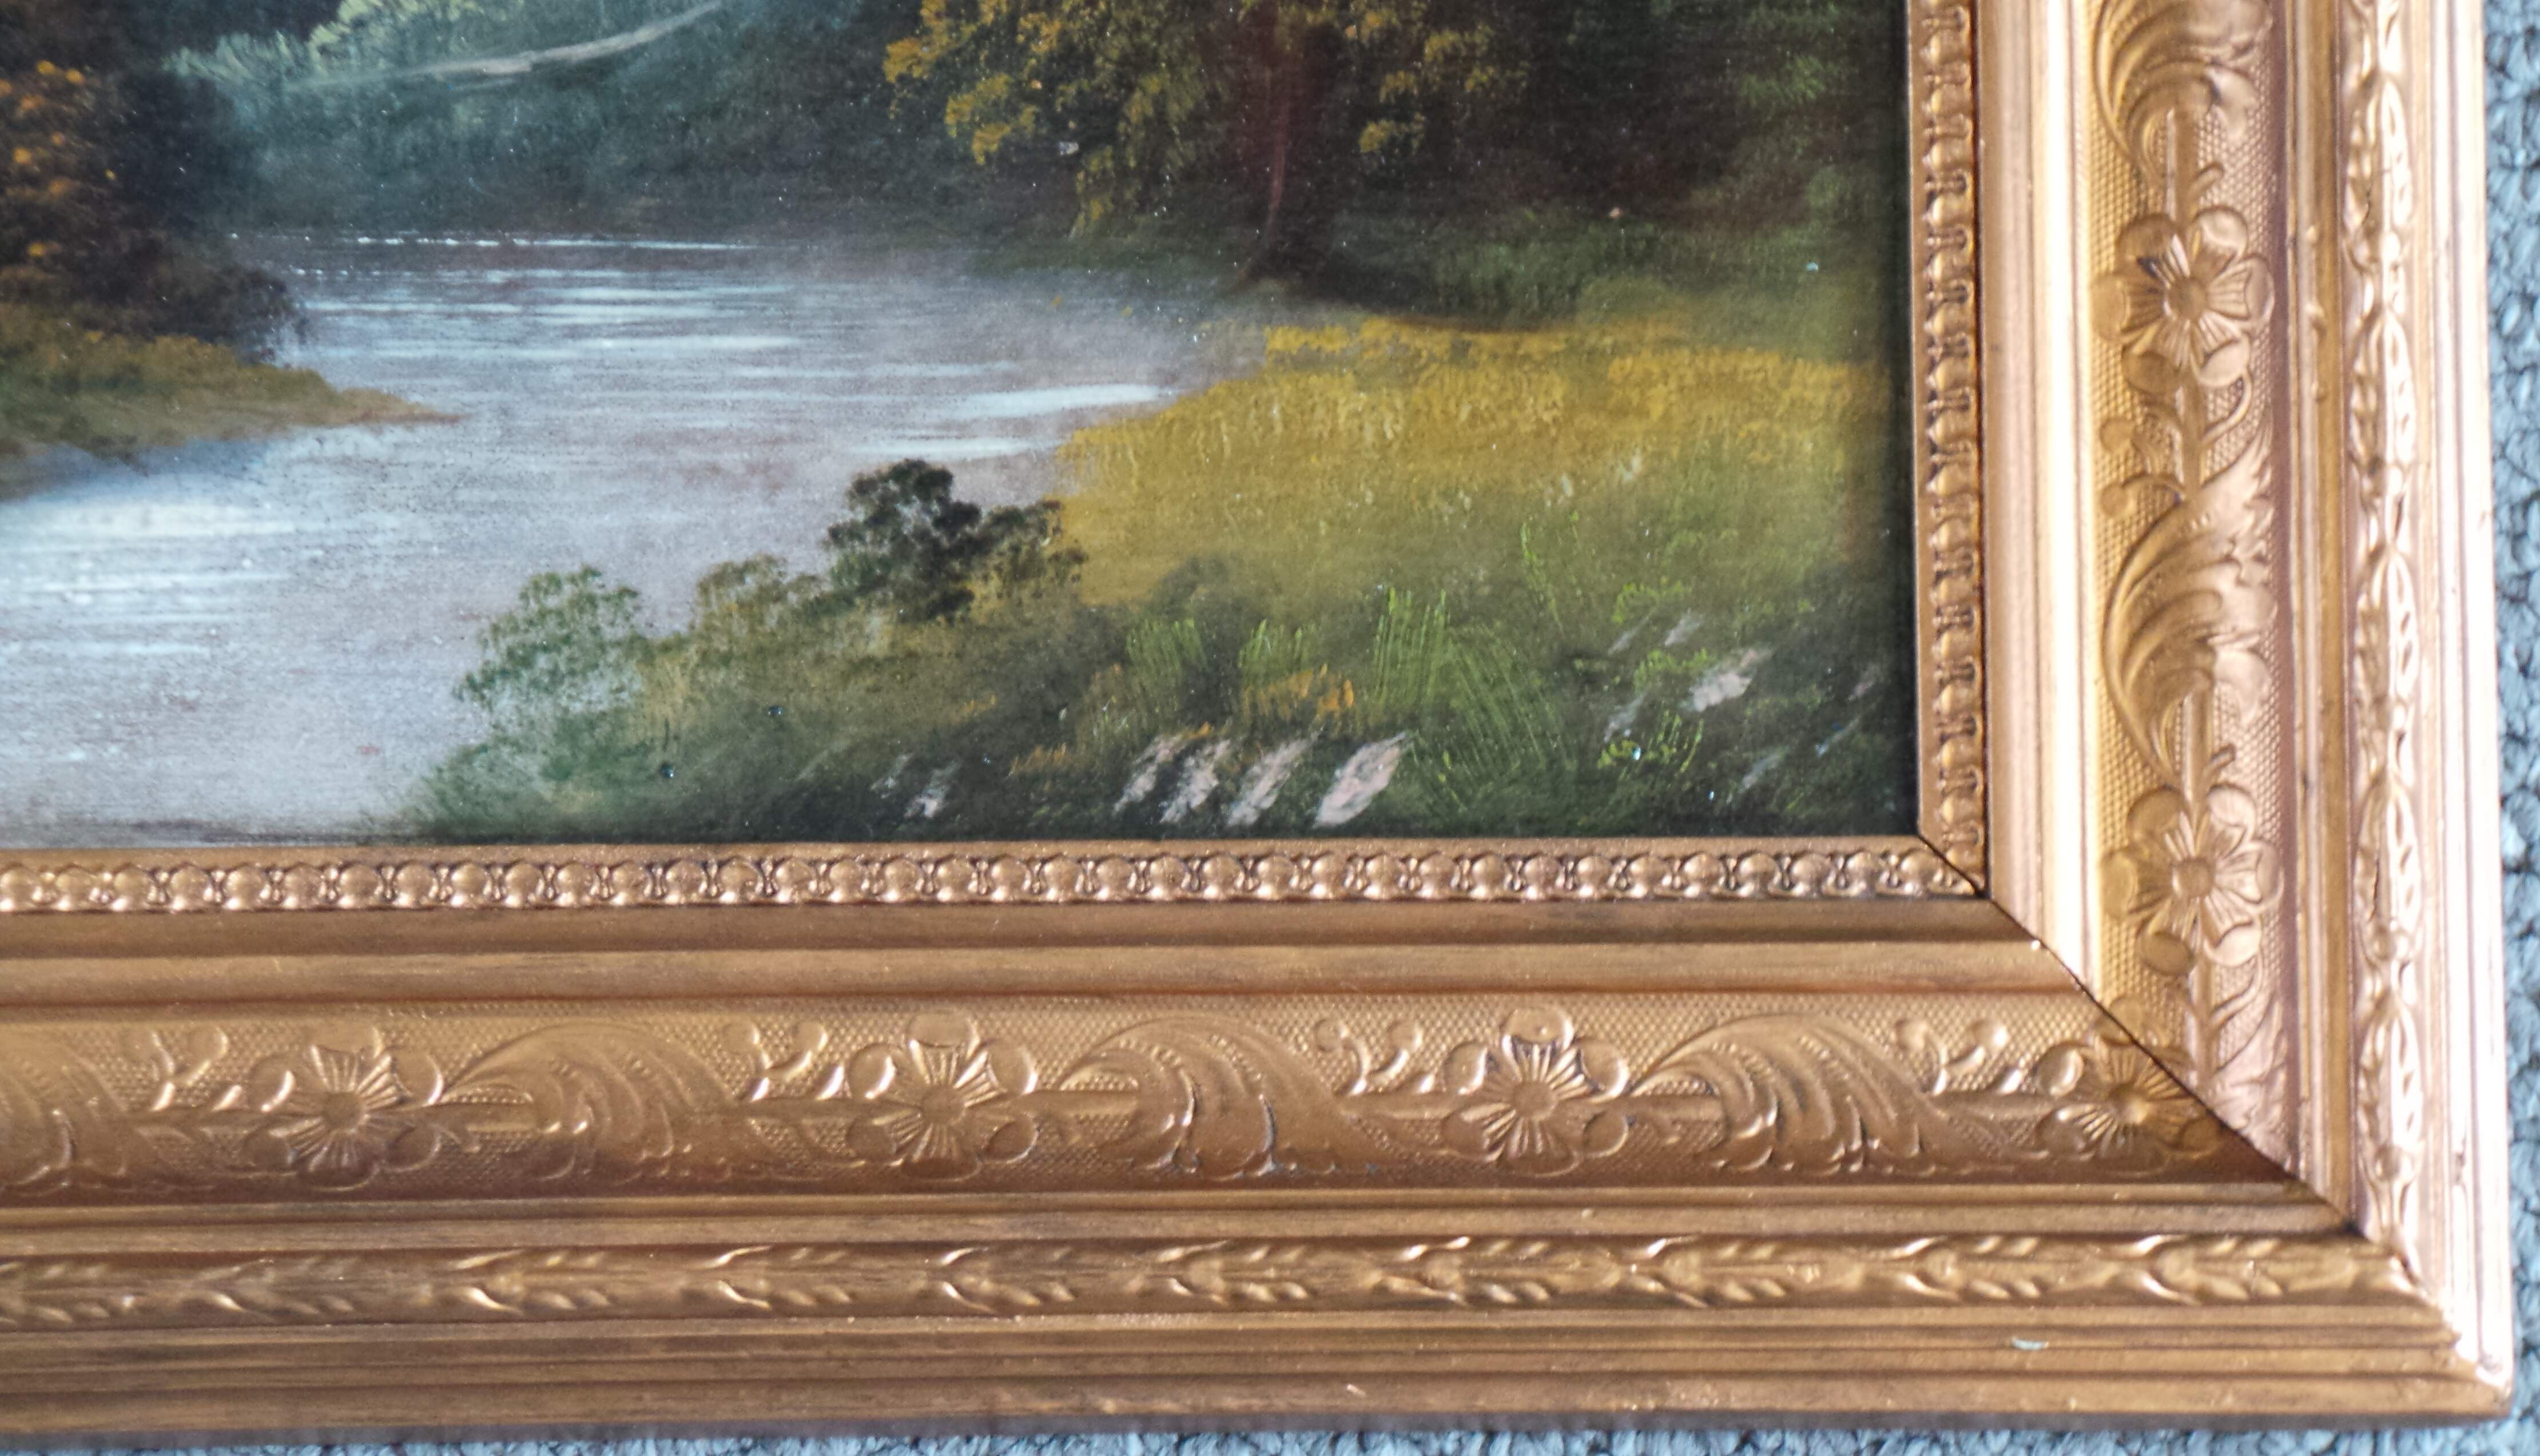 XIX CENTURY OIL PAINTING ON BOARD OF CHURCH, FARM AND A RIVER.